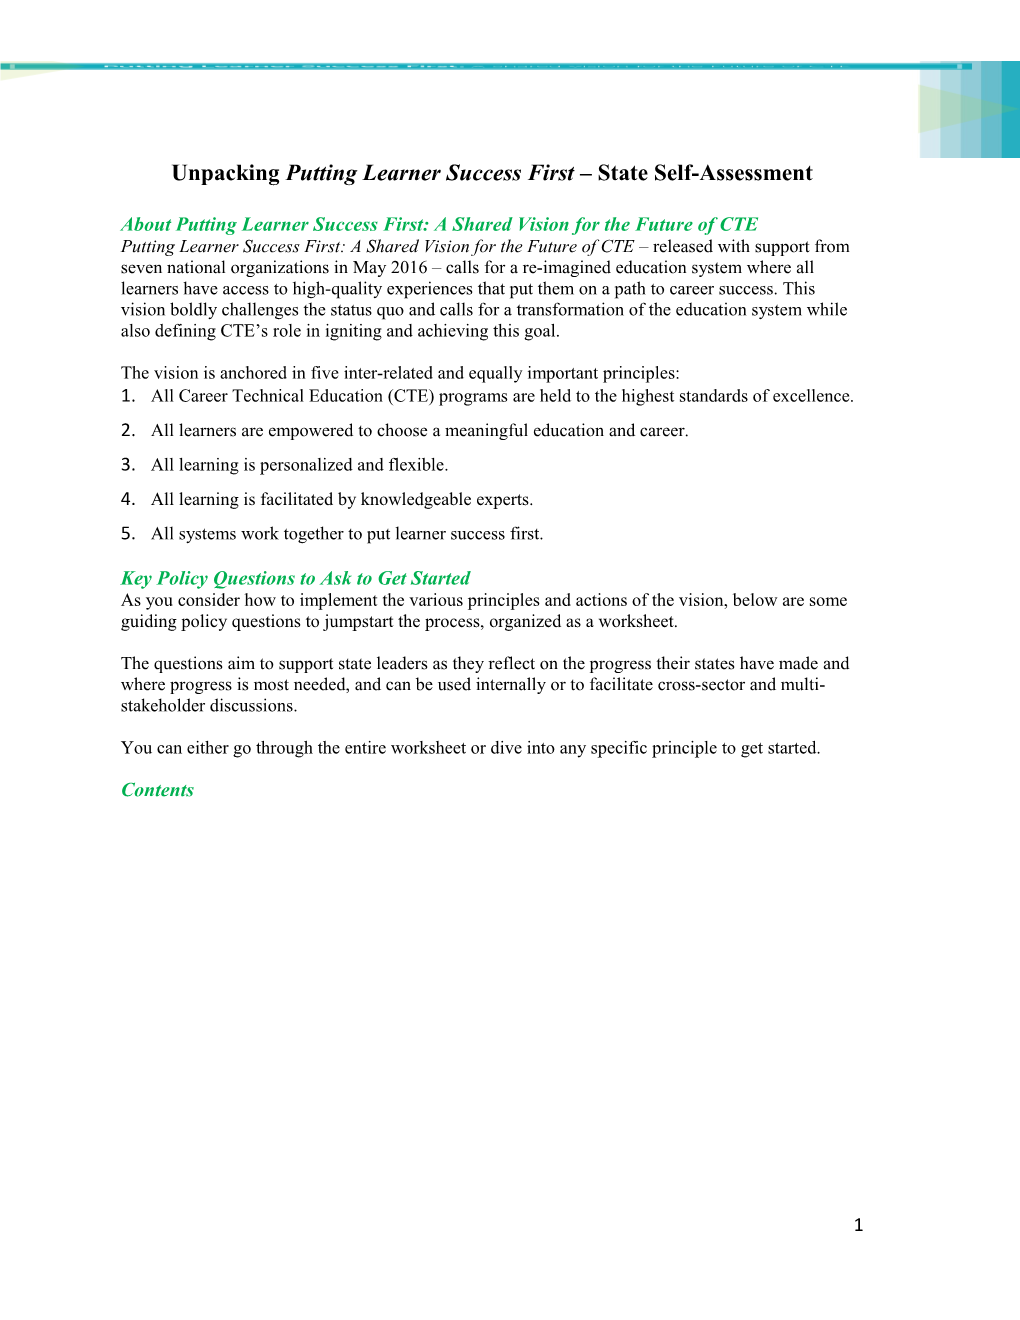 Unpacking Putting Learner Success First State Self-Assessment